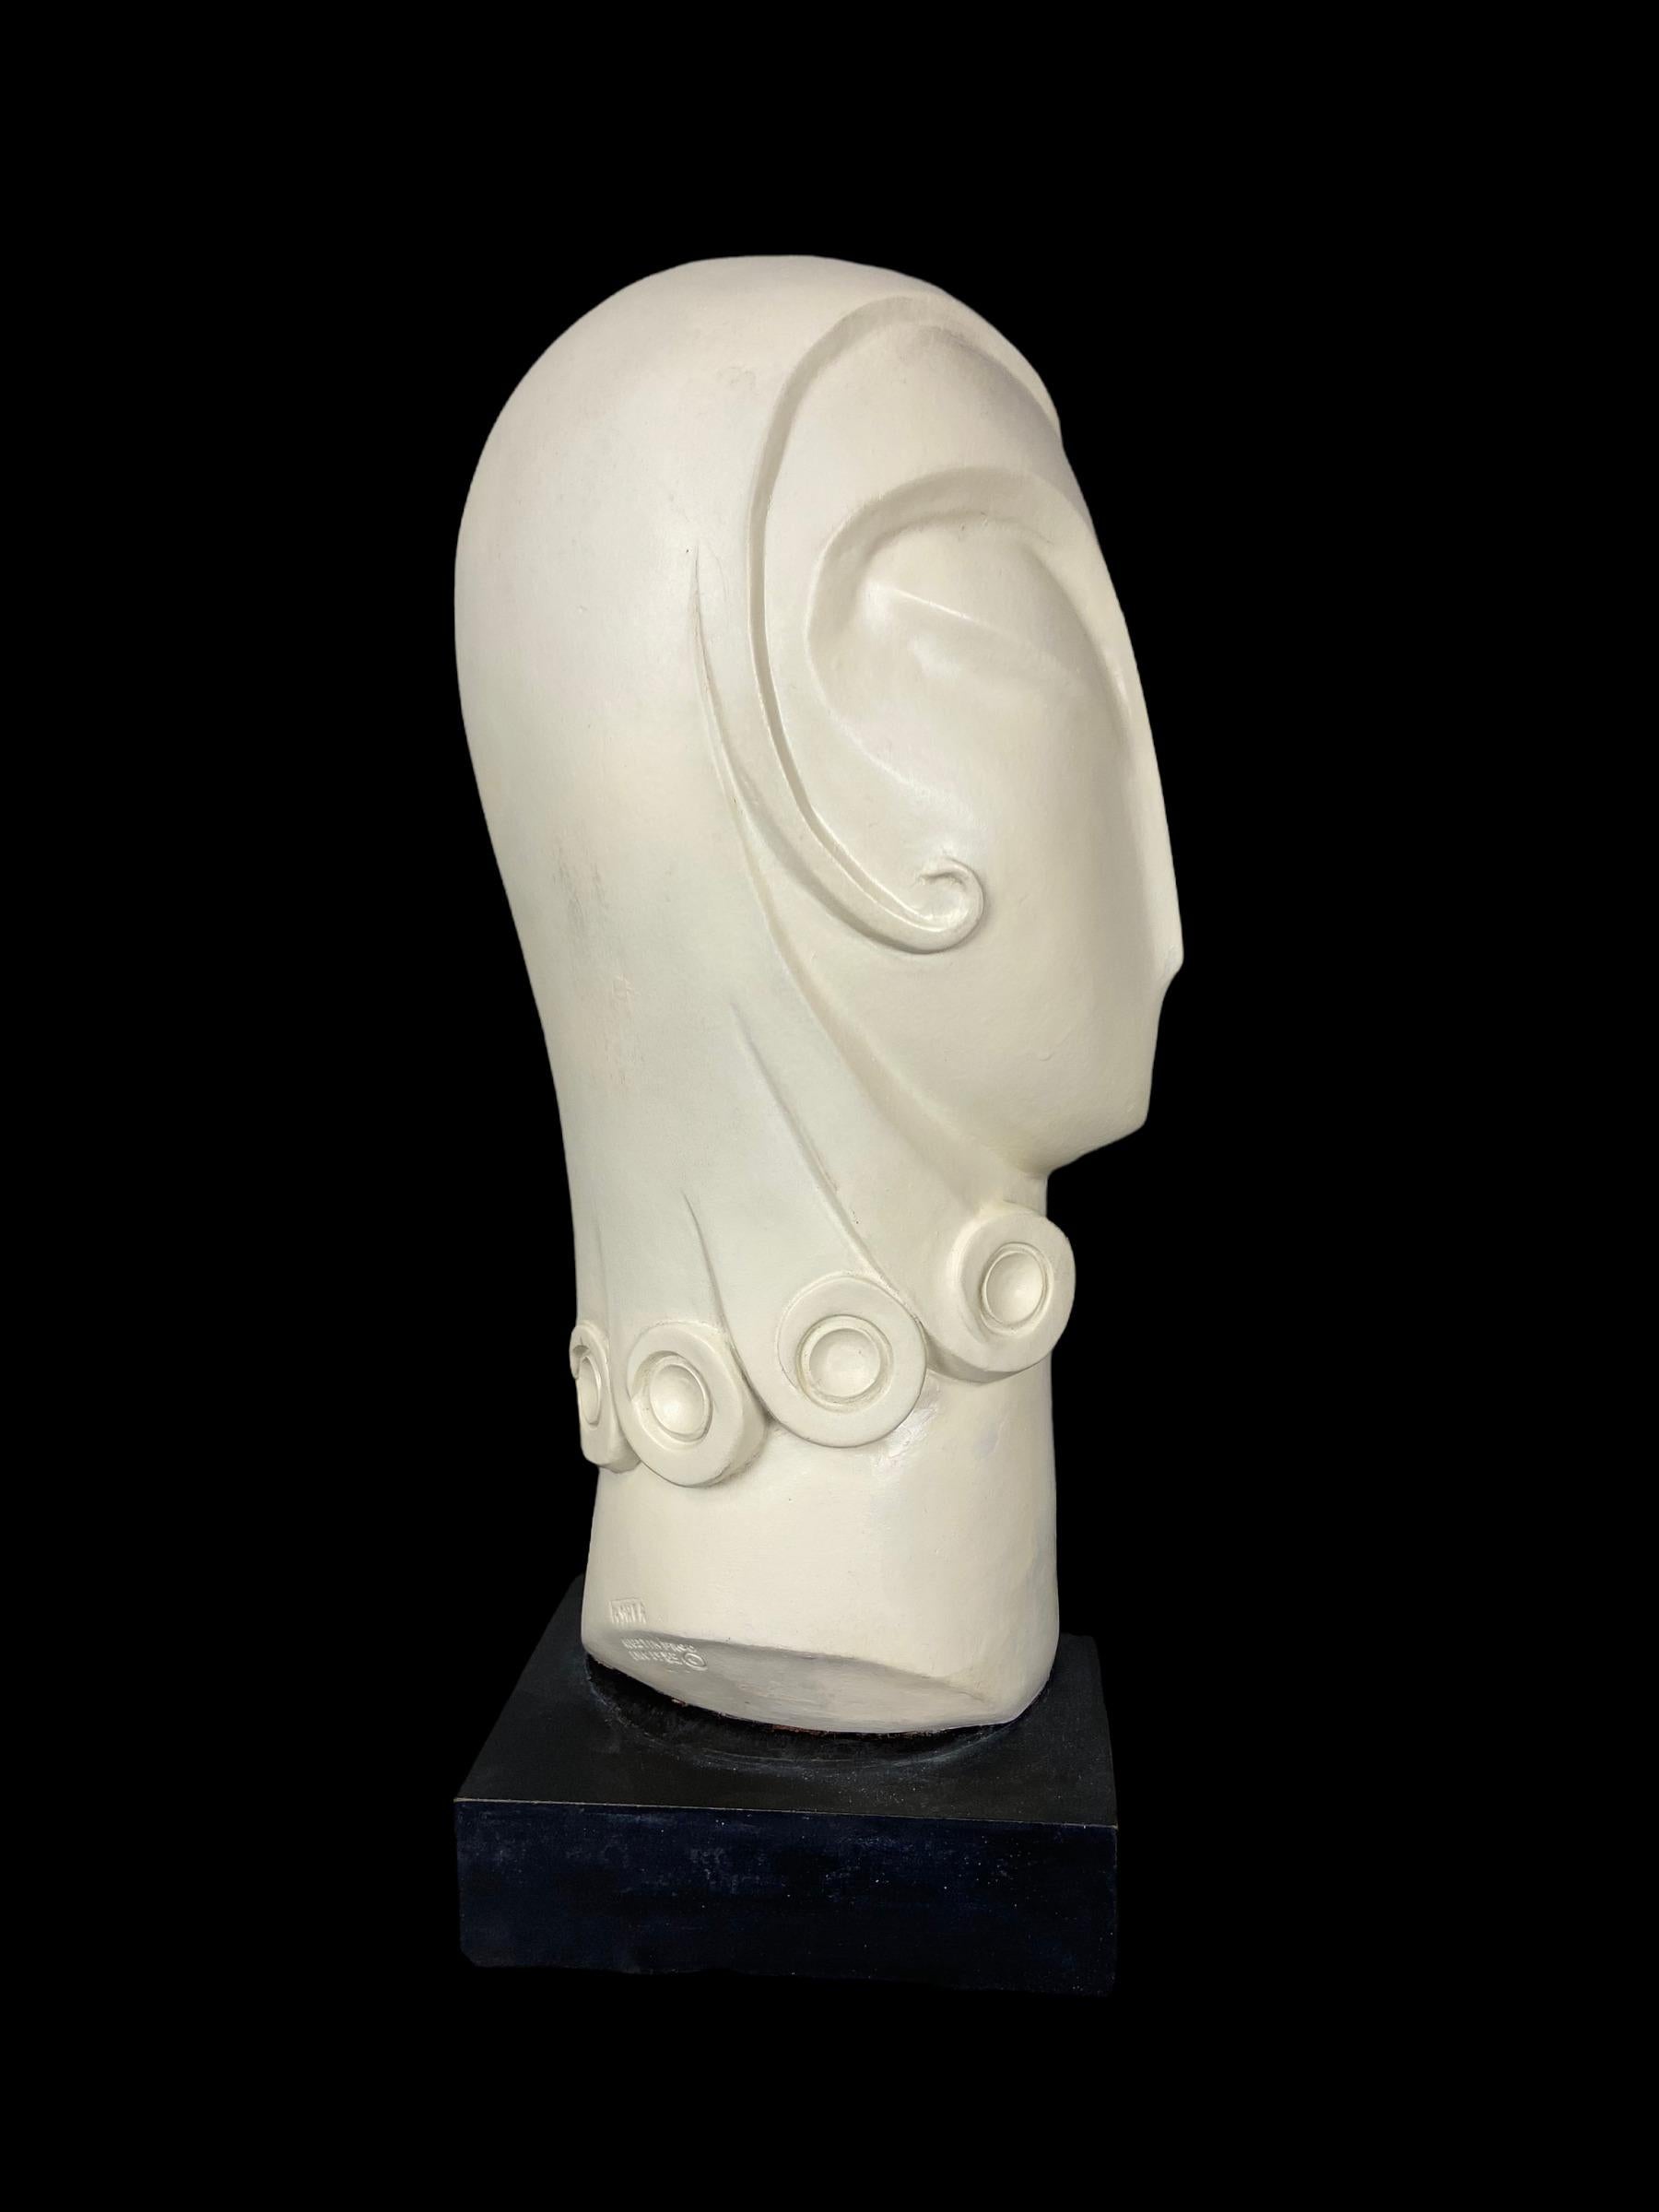 Ceramic statue made and signed by David Fisher for Austin Productions in 1985. Crème coloured painted.The wooden pedestal is not included. This plaster female bust is in a good condition but it shows sign of age.